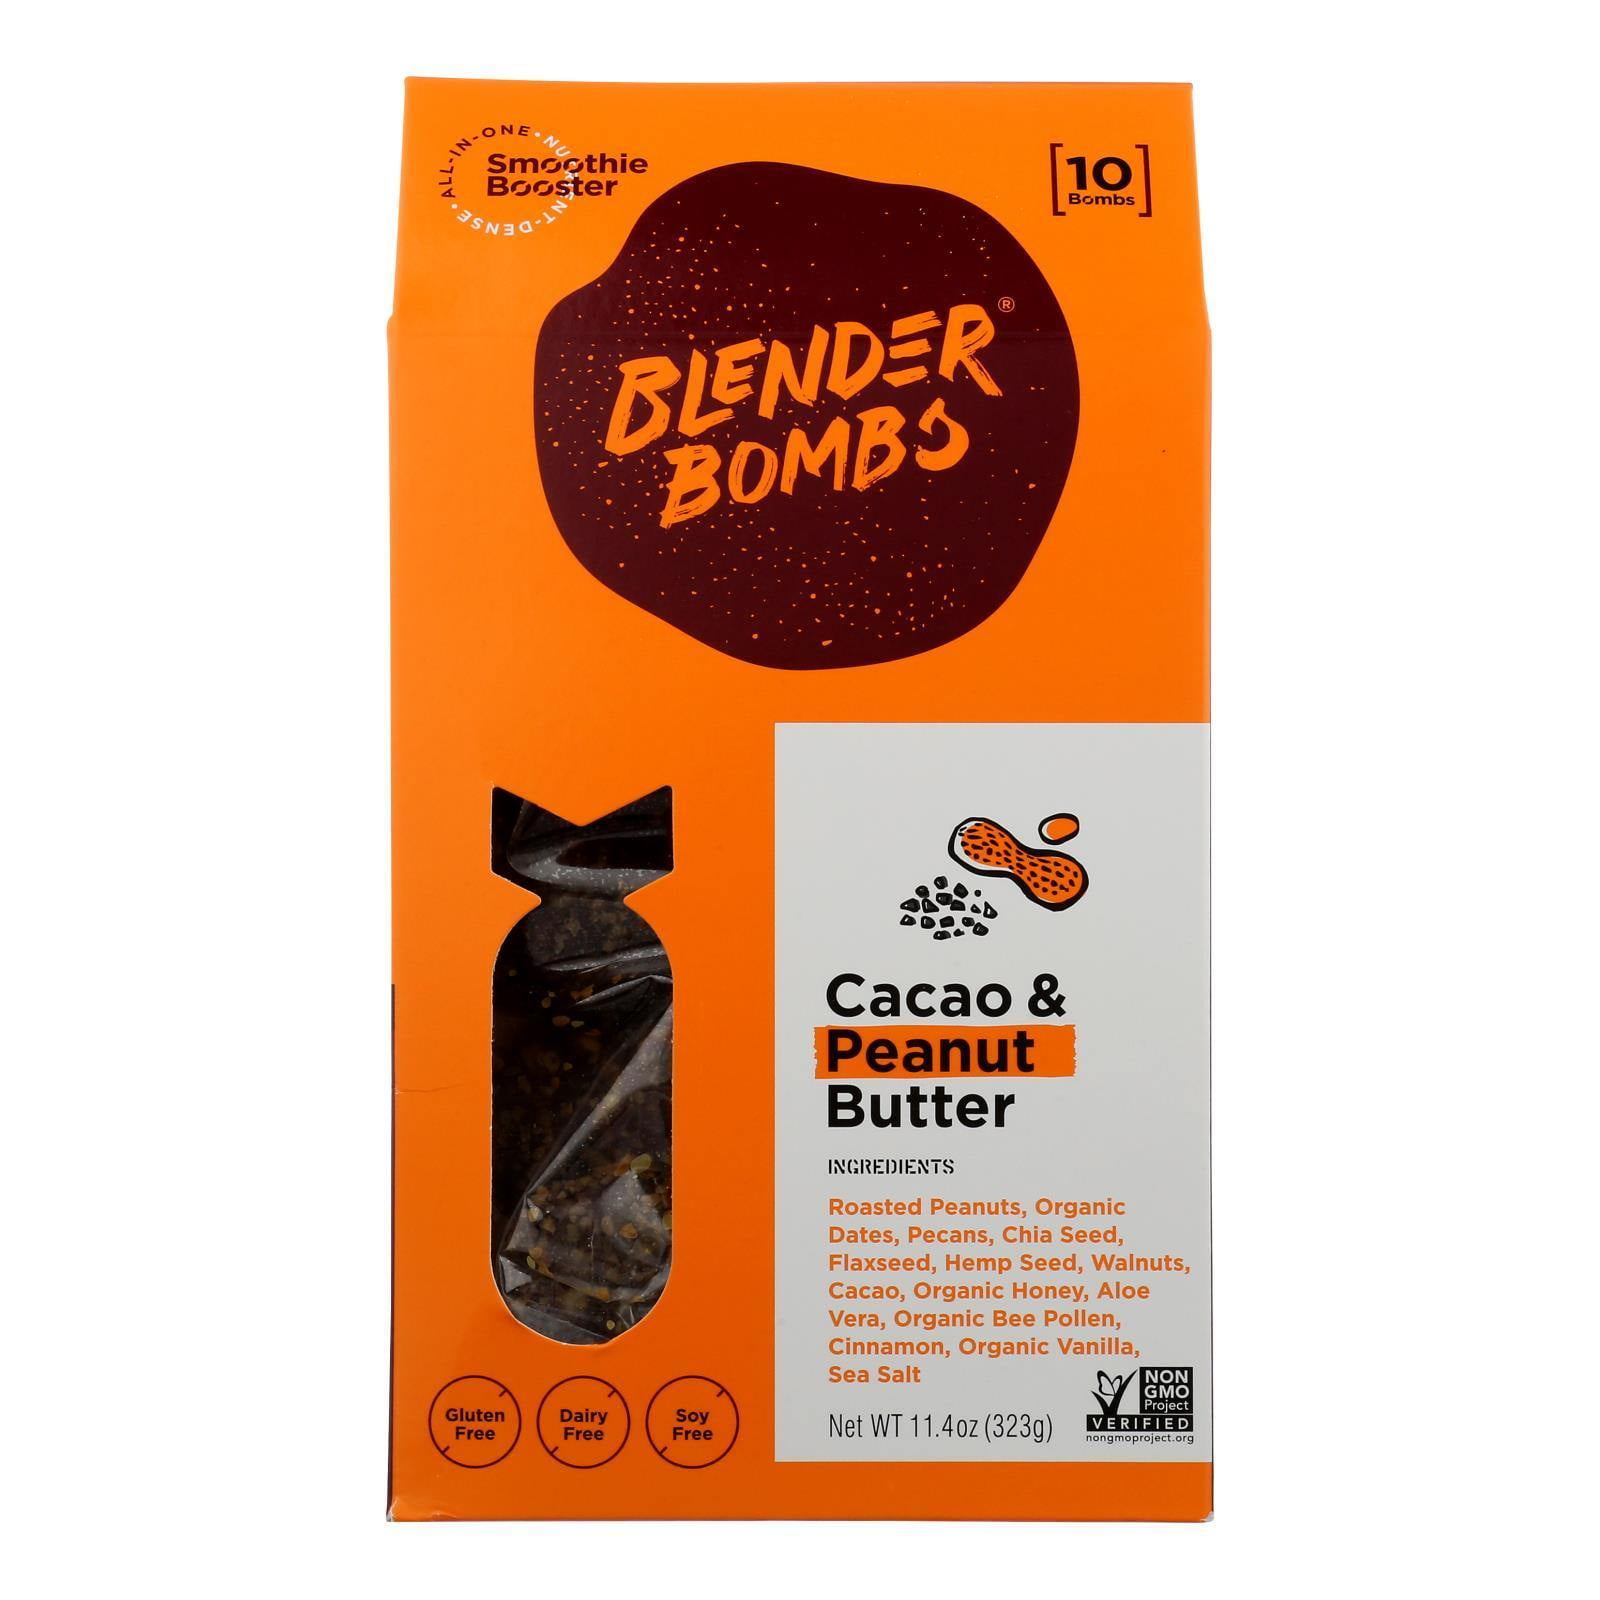 Blender Bombs - Blend Bomb Coffee Almond Caco - 1 Each - 10 Count